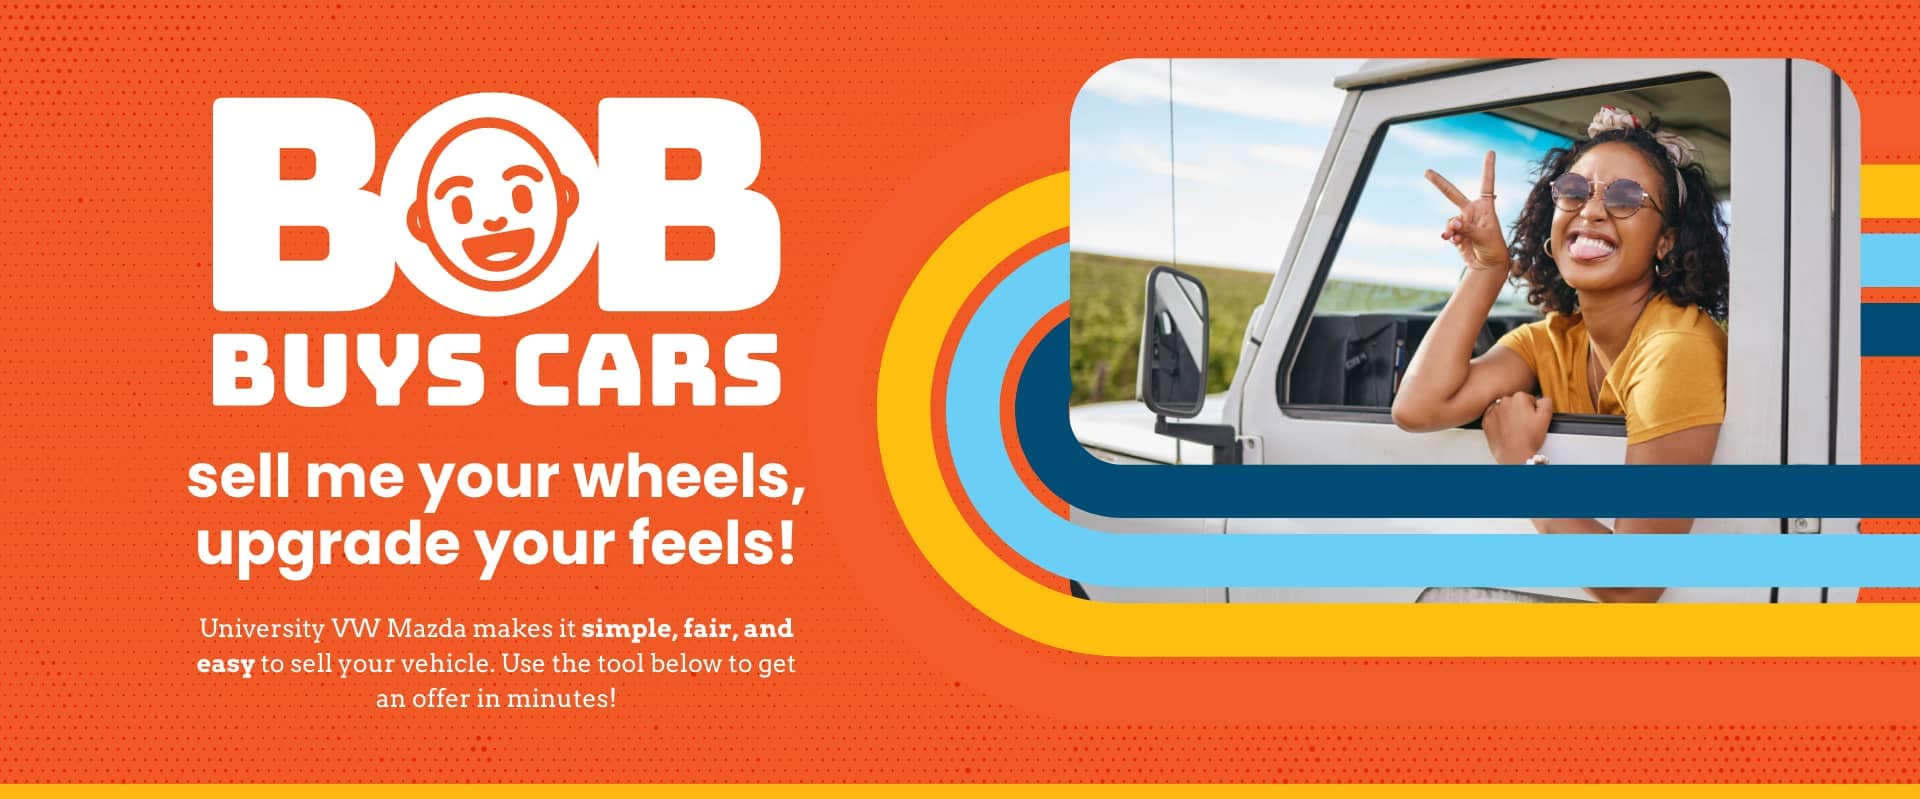 Bob Buys Cars - sell me your wheels, upgrade your feels University VW Mazda makes it simpler, fair, and easy to sell your vehicle.  Use the tool below to get an offer in minutes